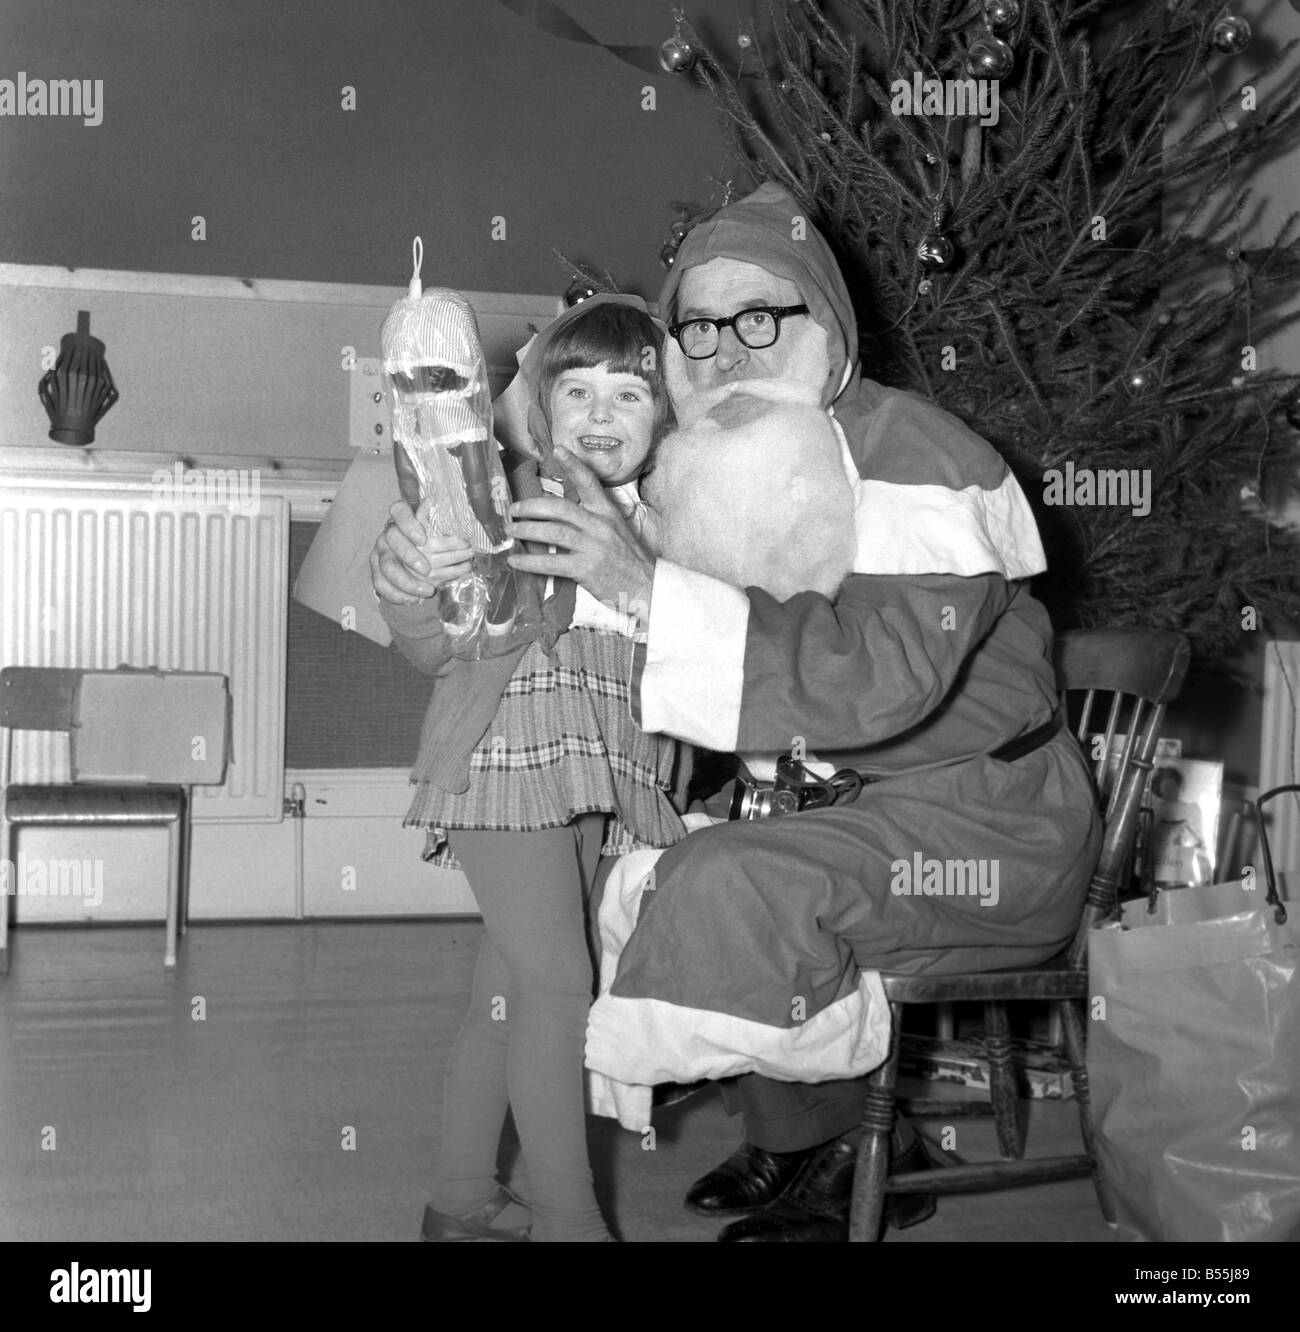 When Father Christmas is on duty handing out toys and gifts to children, children become enraptured with the bewhiskered figure Stock Photo